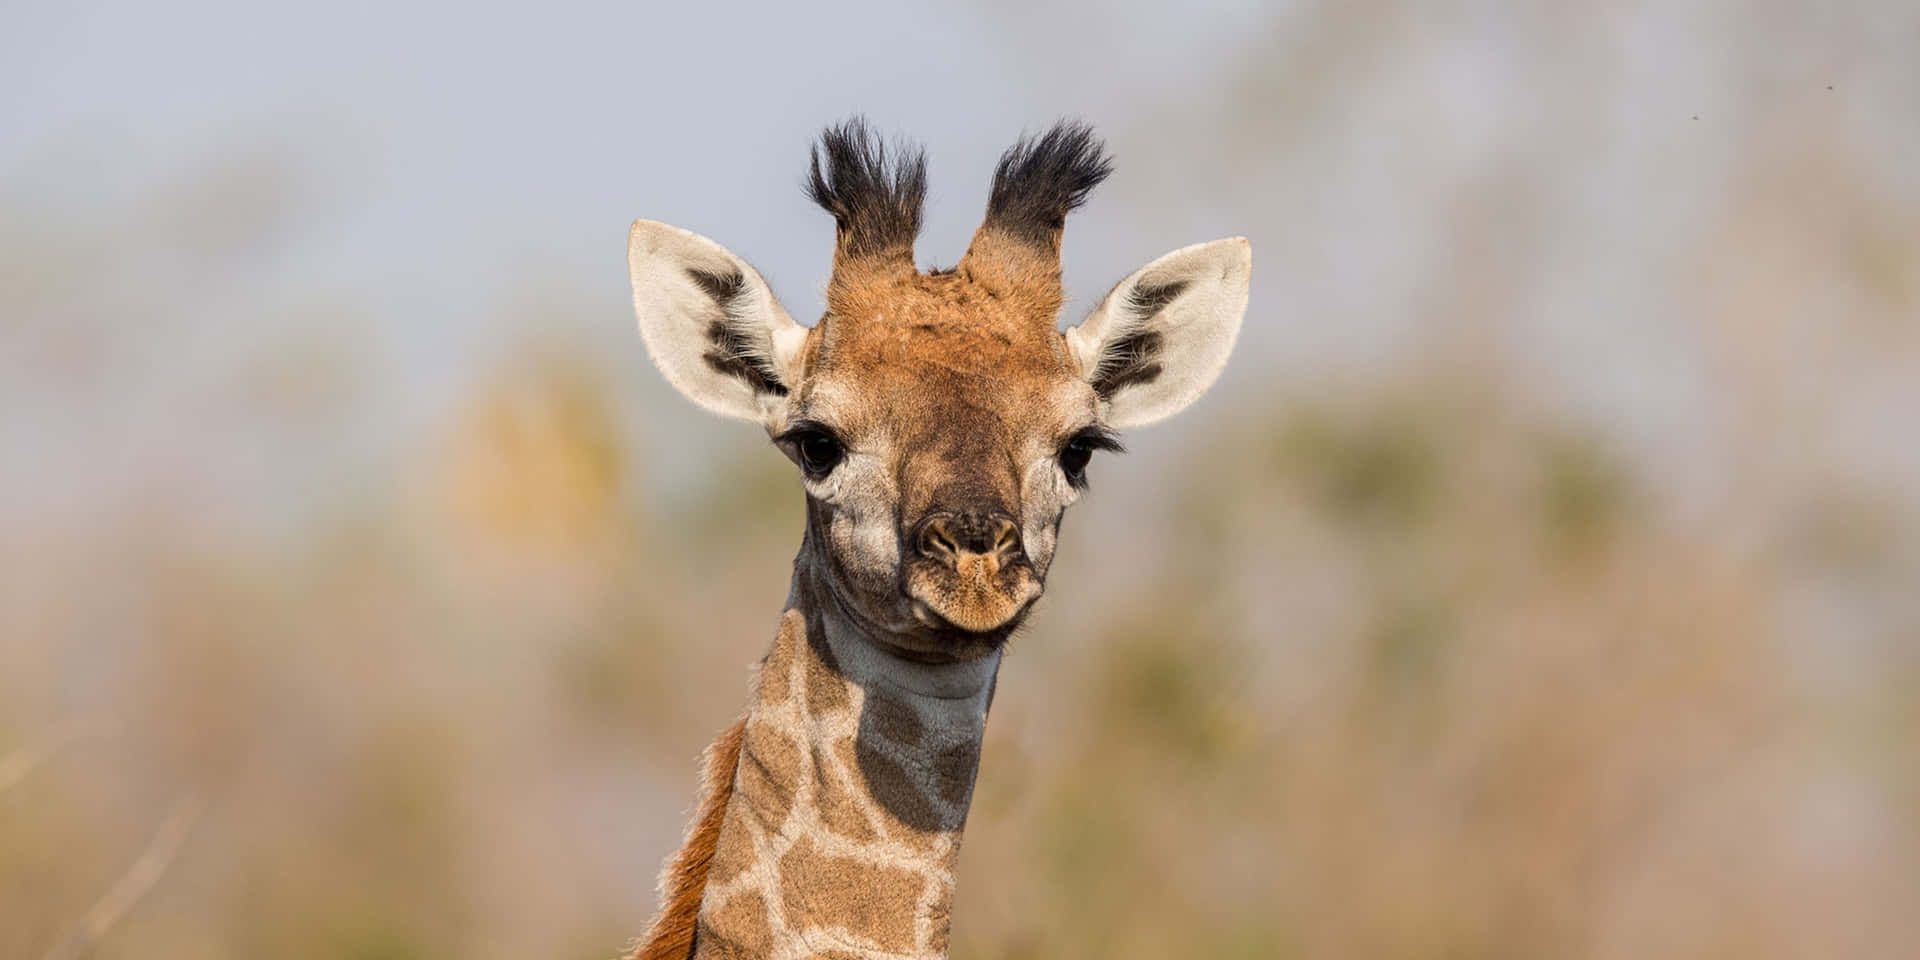 A whimsical baby giraffe with a curious look in its eye